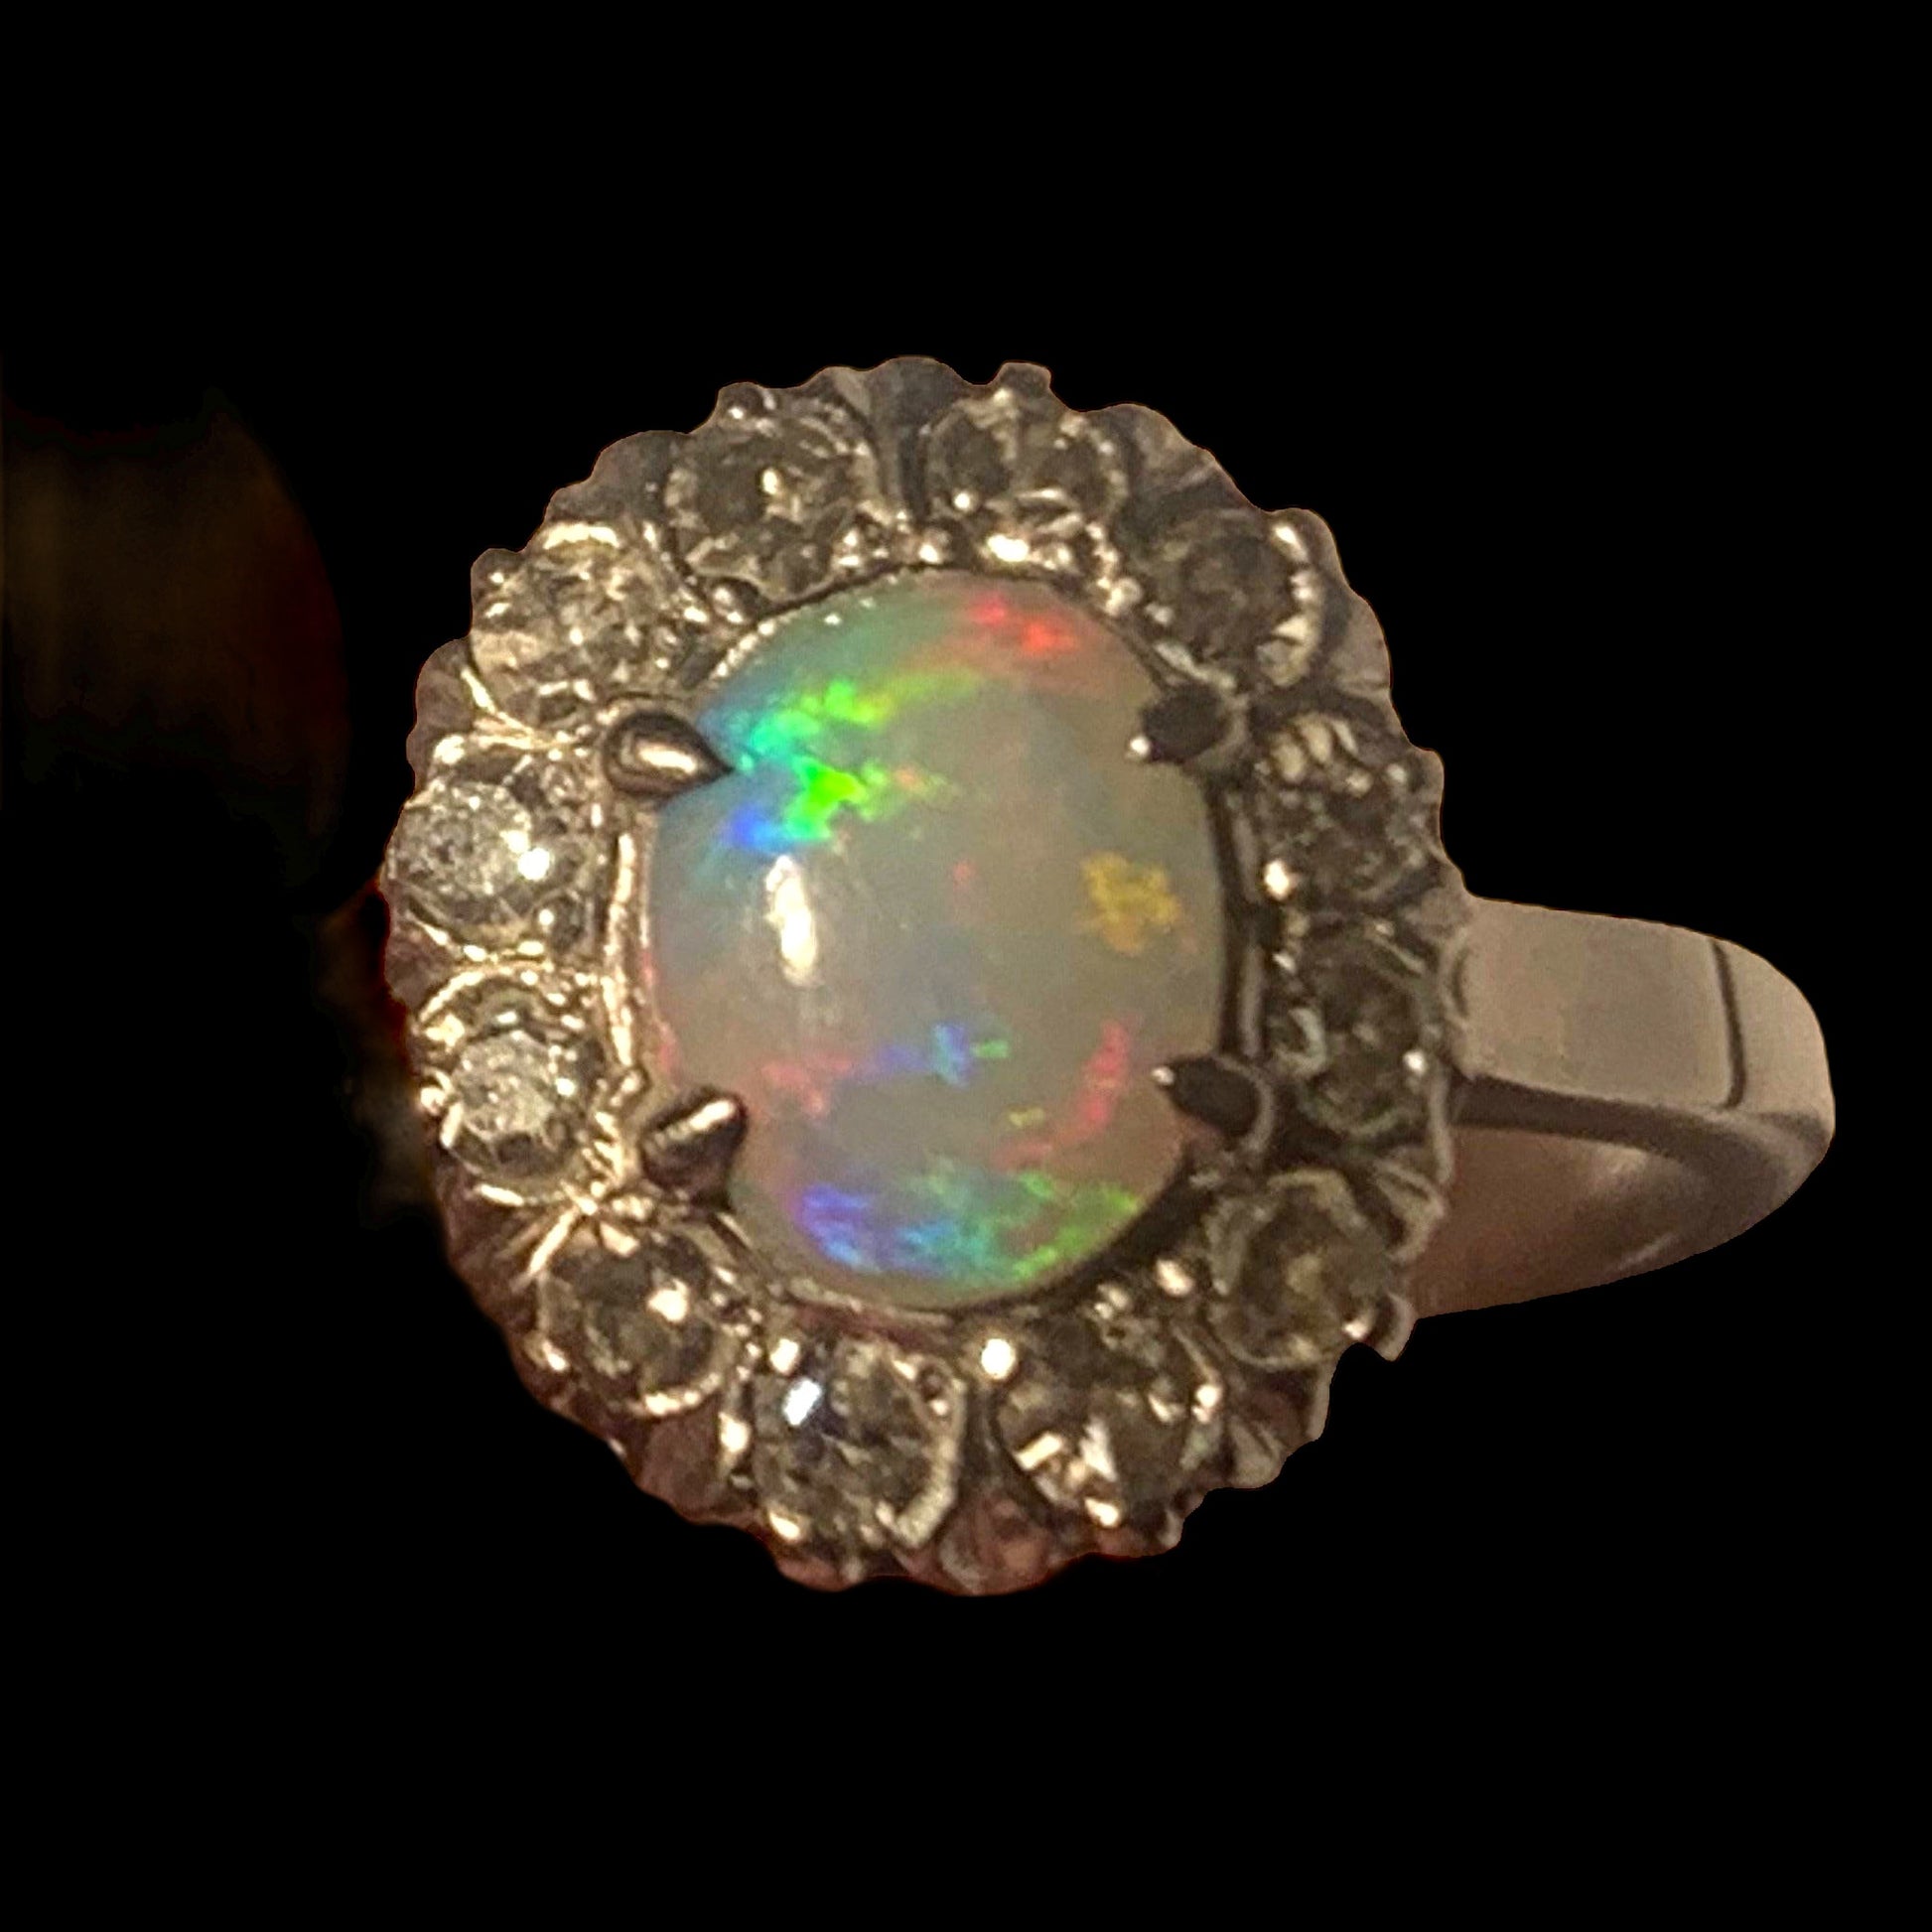 Opal and diamond engagement ring - Opal Essence Wholesalers 